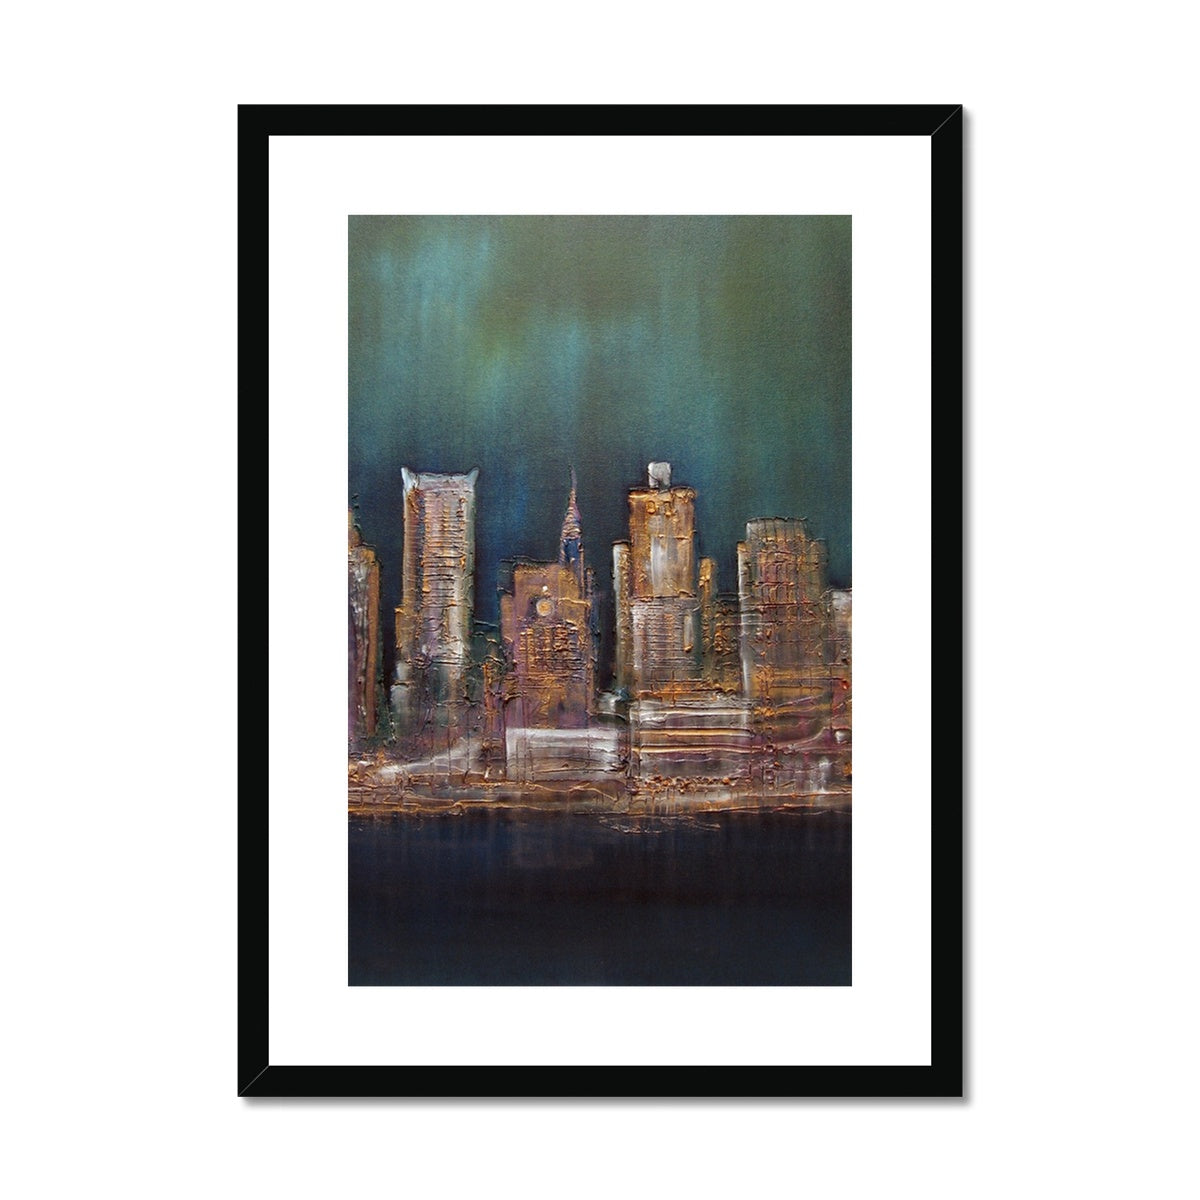 New York West Side Painting | Framed & Mounted Prints From Scotland-Framed & Mounted Prints-World Art Gallery-A2 Portrait-Black Frame-Paintings, Prints, Homeware, Art Gifts From Scotland By Scottish Artist Kevin Hunter